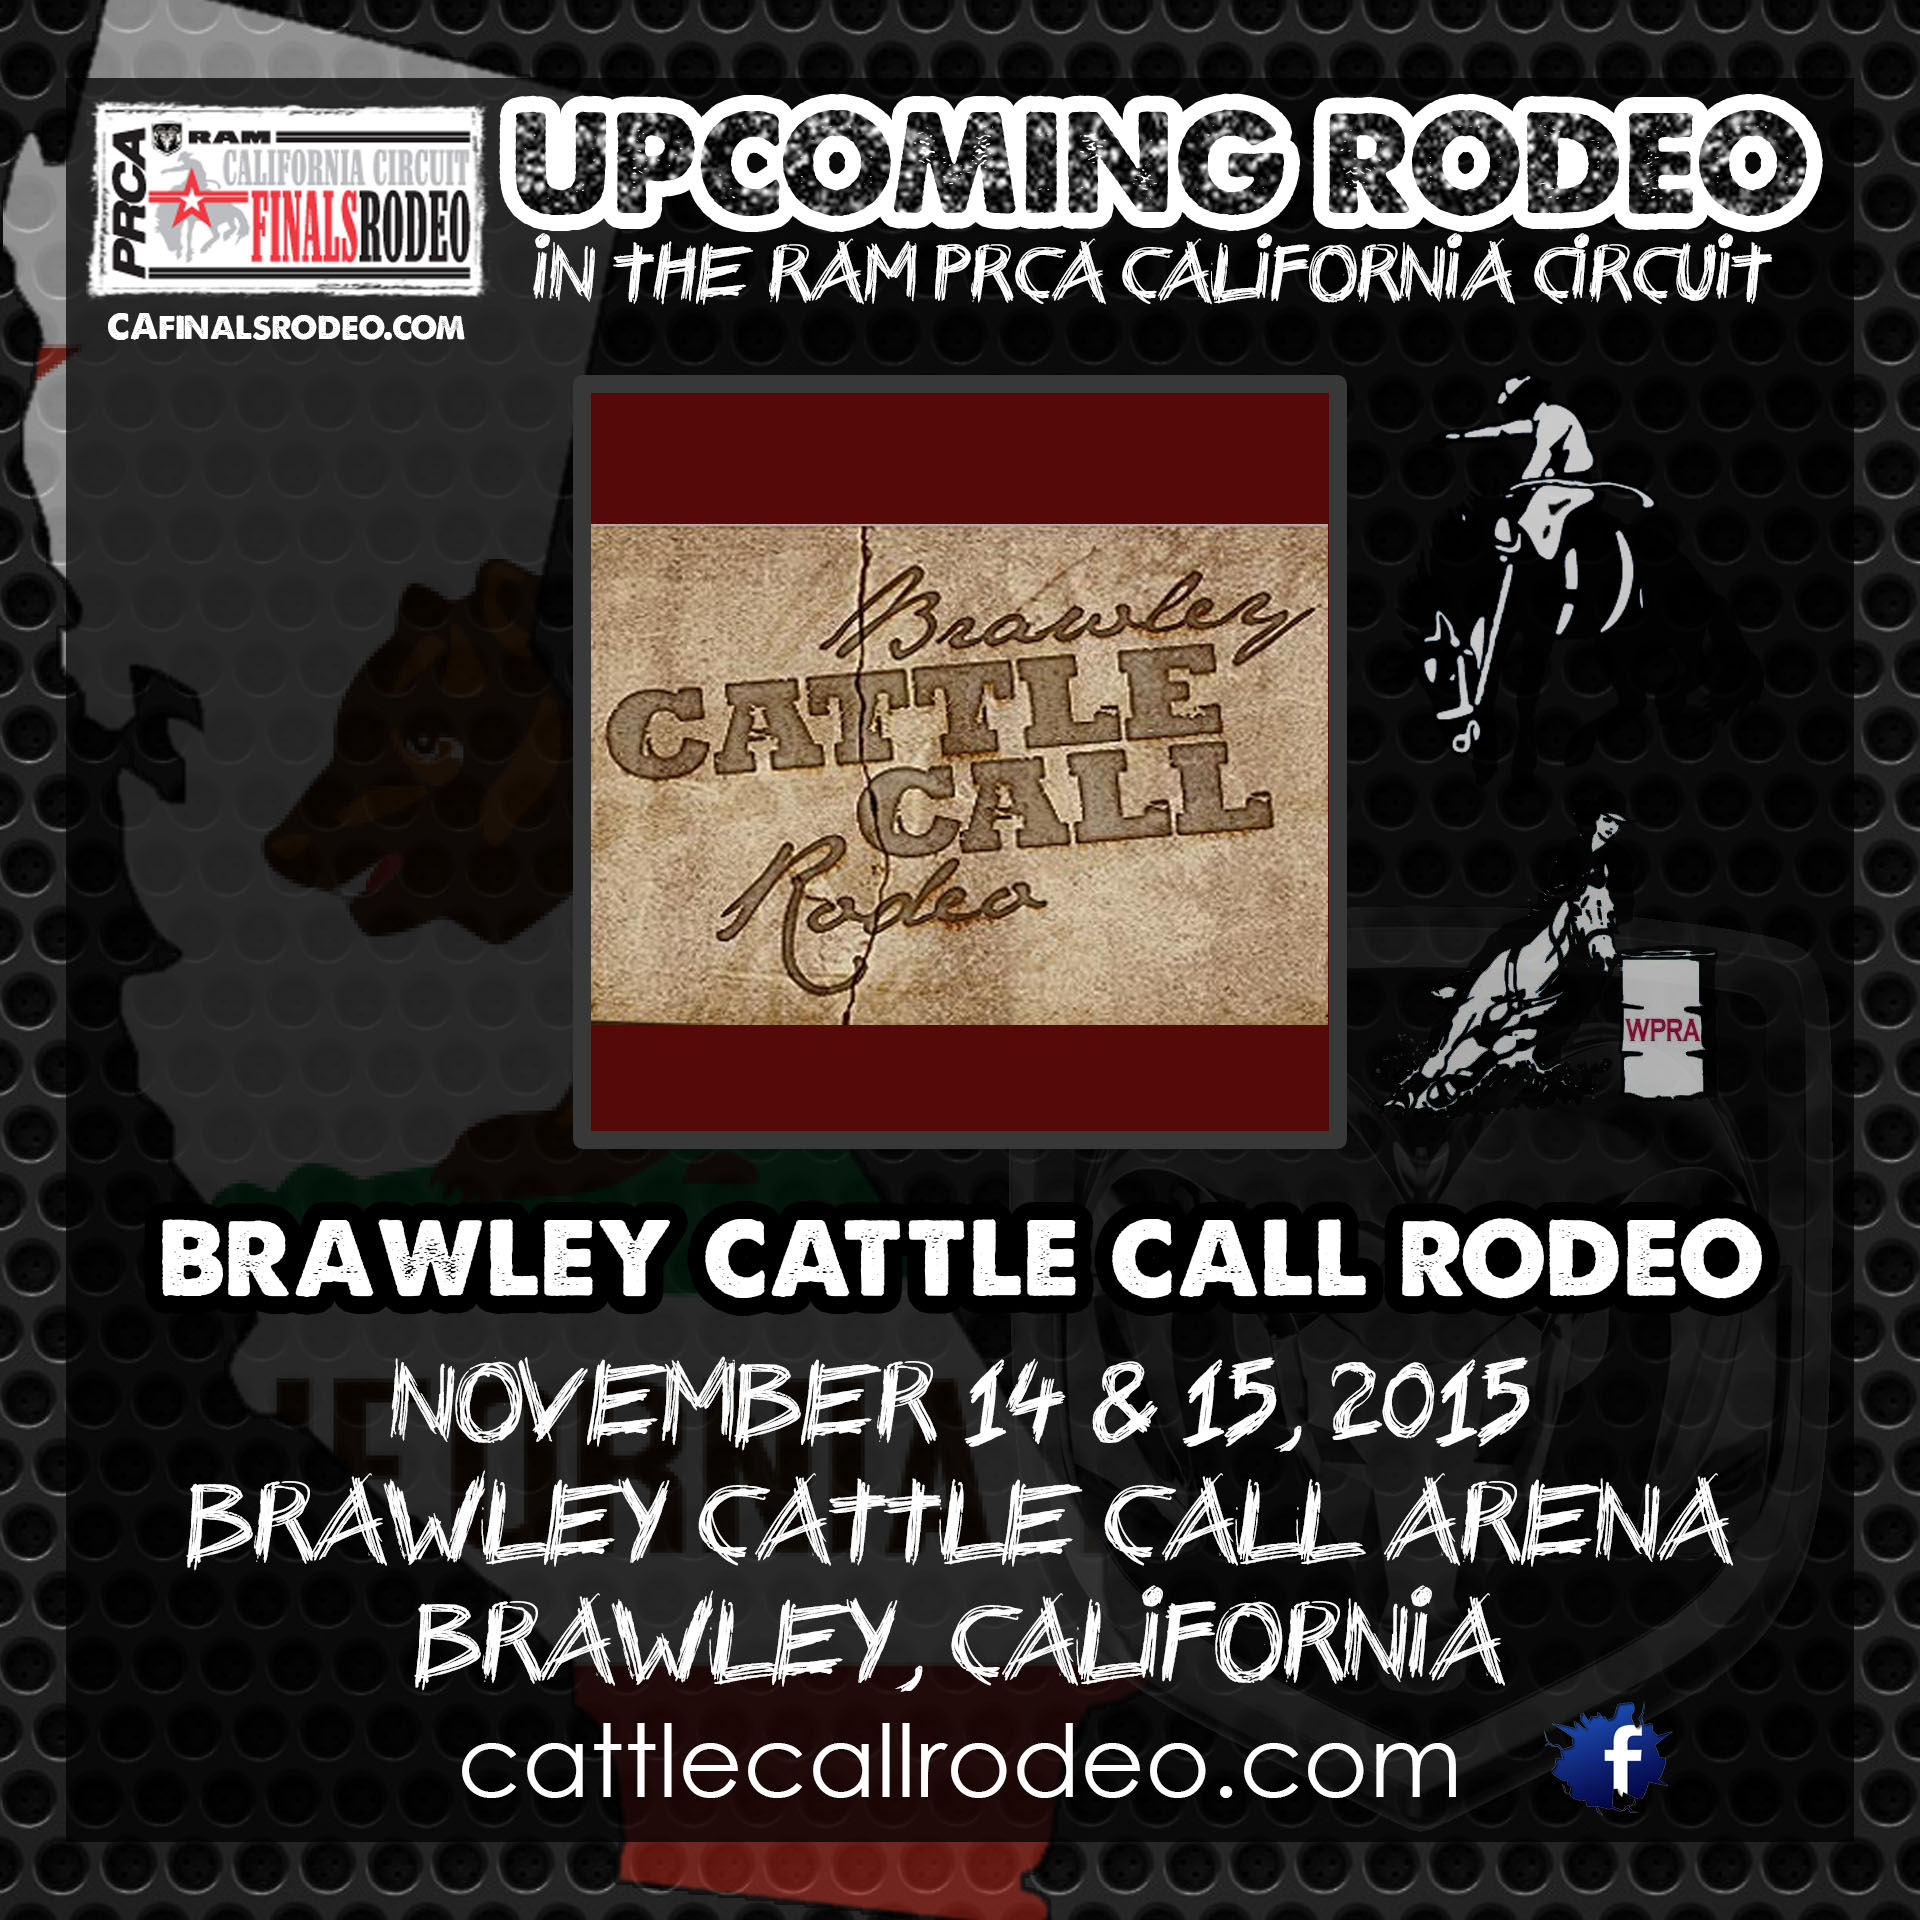 The Brawley Cattle Call Rodeo starts today! RAM PRCA California